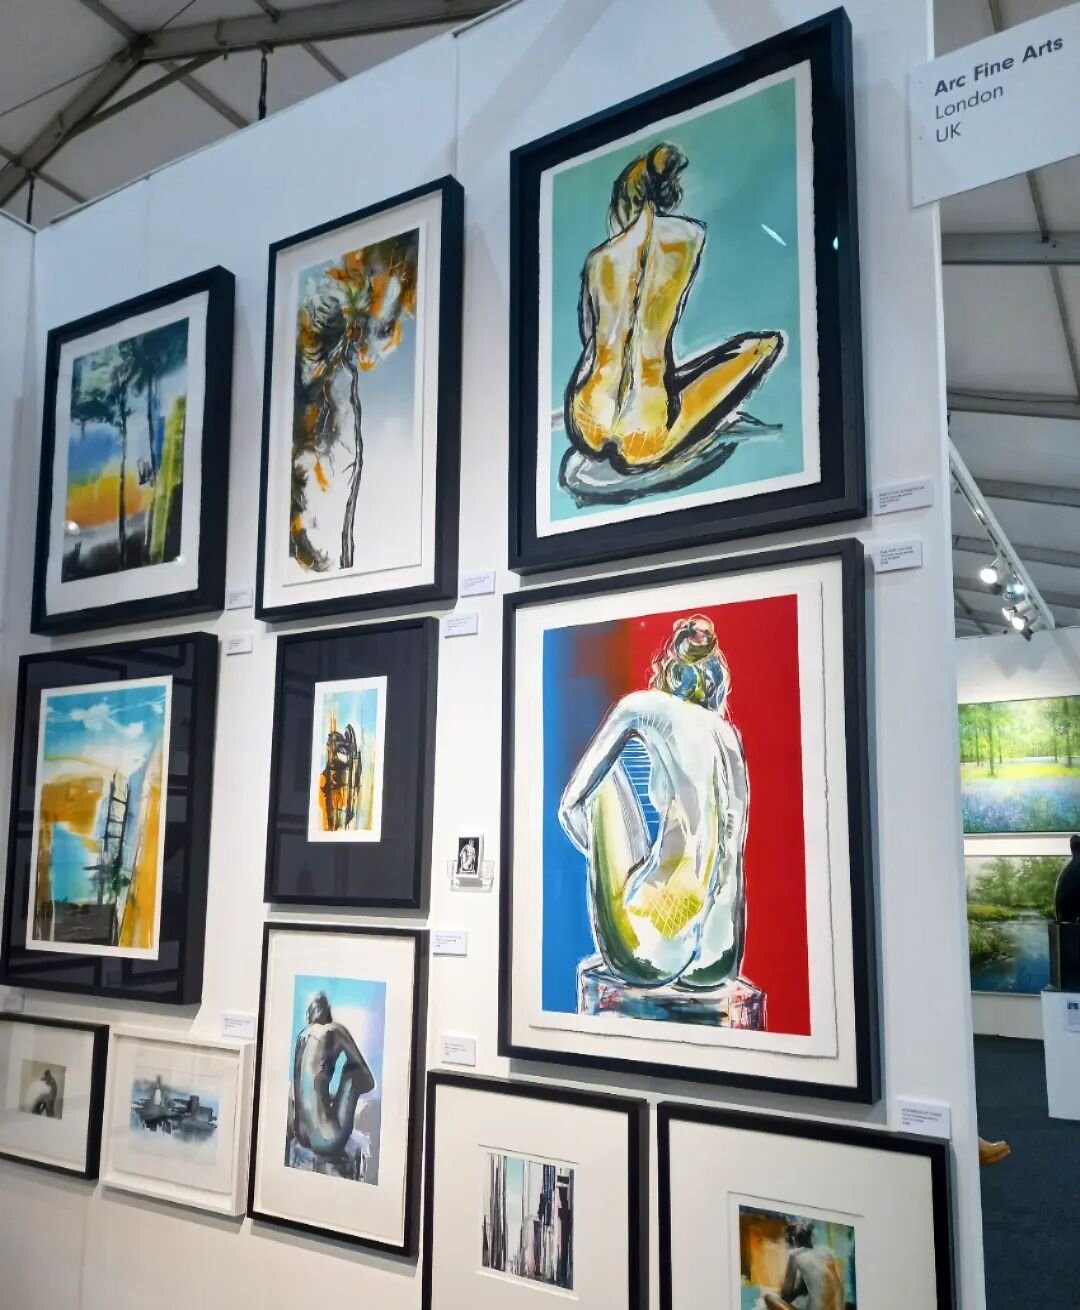 Showing @affordableartfairuk in Hampstead today and tomorrow! With Arc Fine Arts on stand D7. 
DM me if you would like a complimentary ticket.

#artforsale
#artcollector 
#framedart 
#artfair 
#artistsoninstagram 
#editionedprints 
#artistsprints